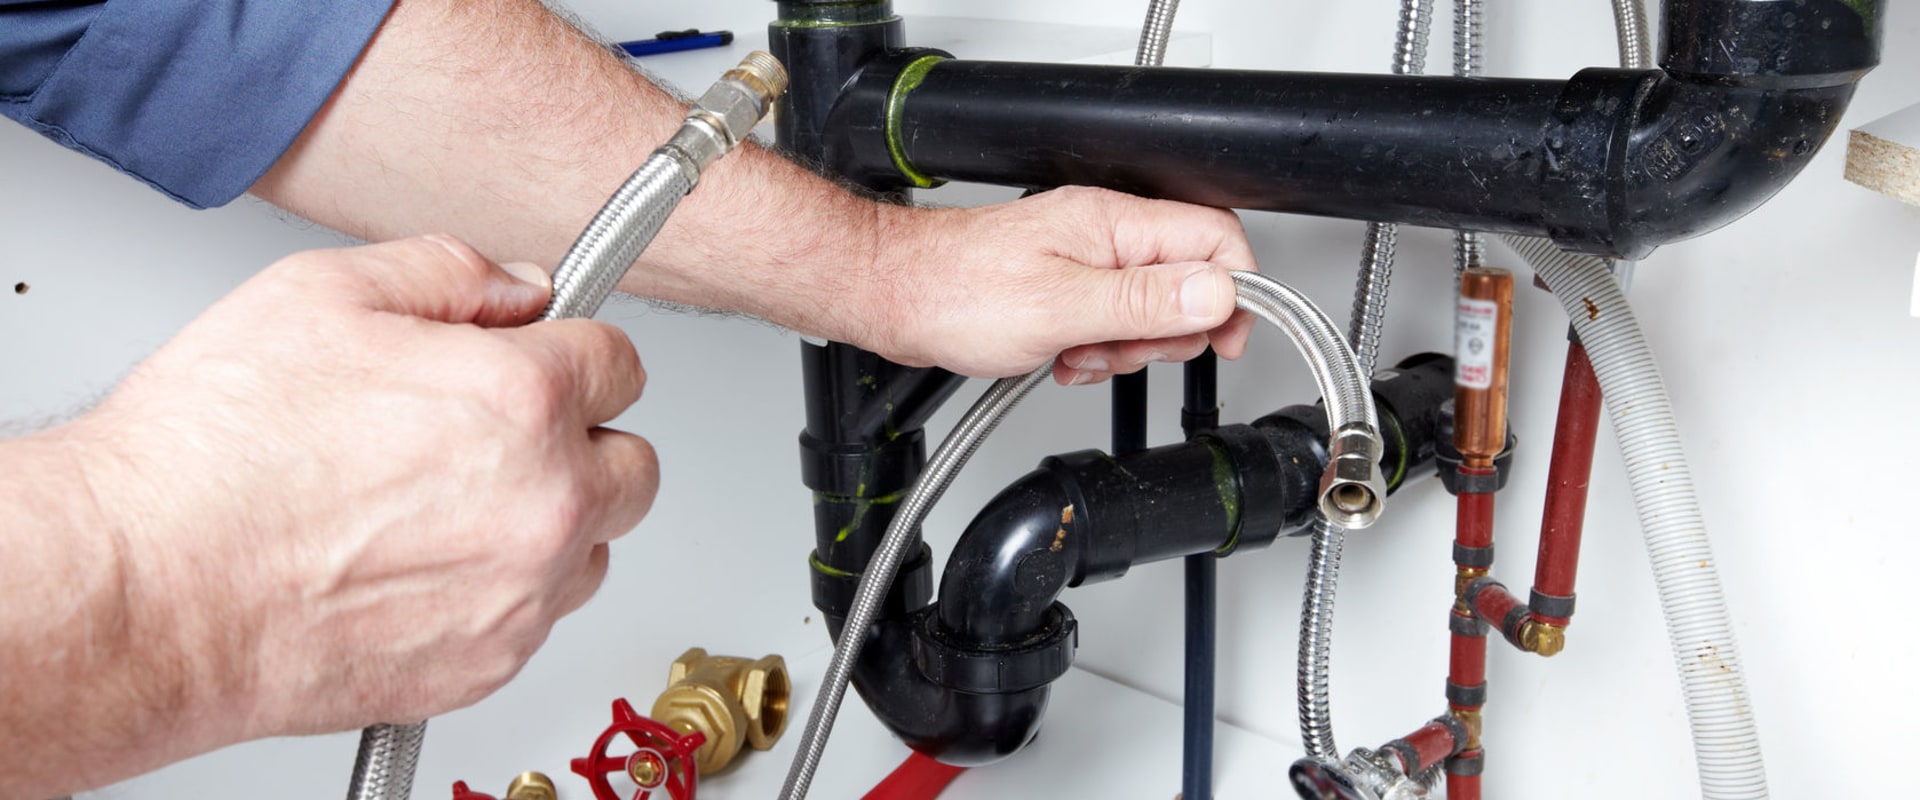 Clogged Drain Repair: What You Need To Know